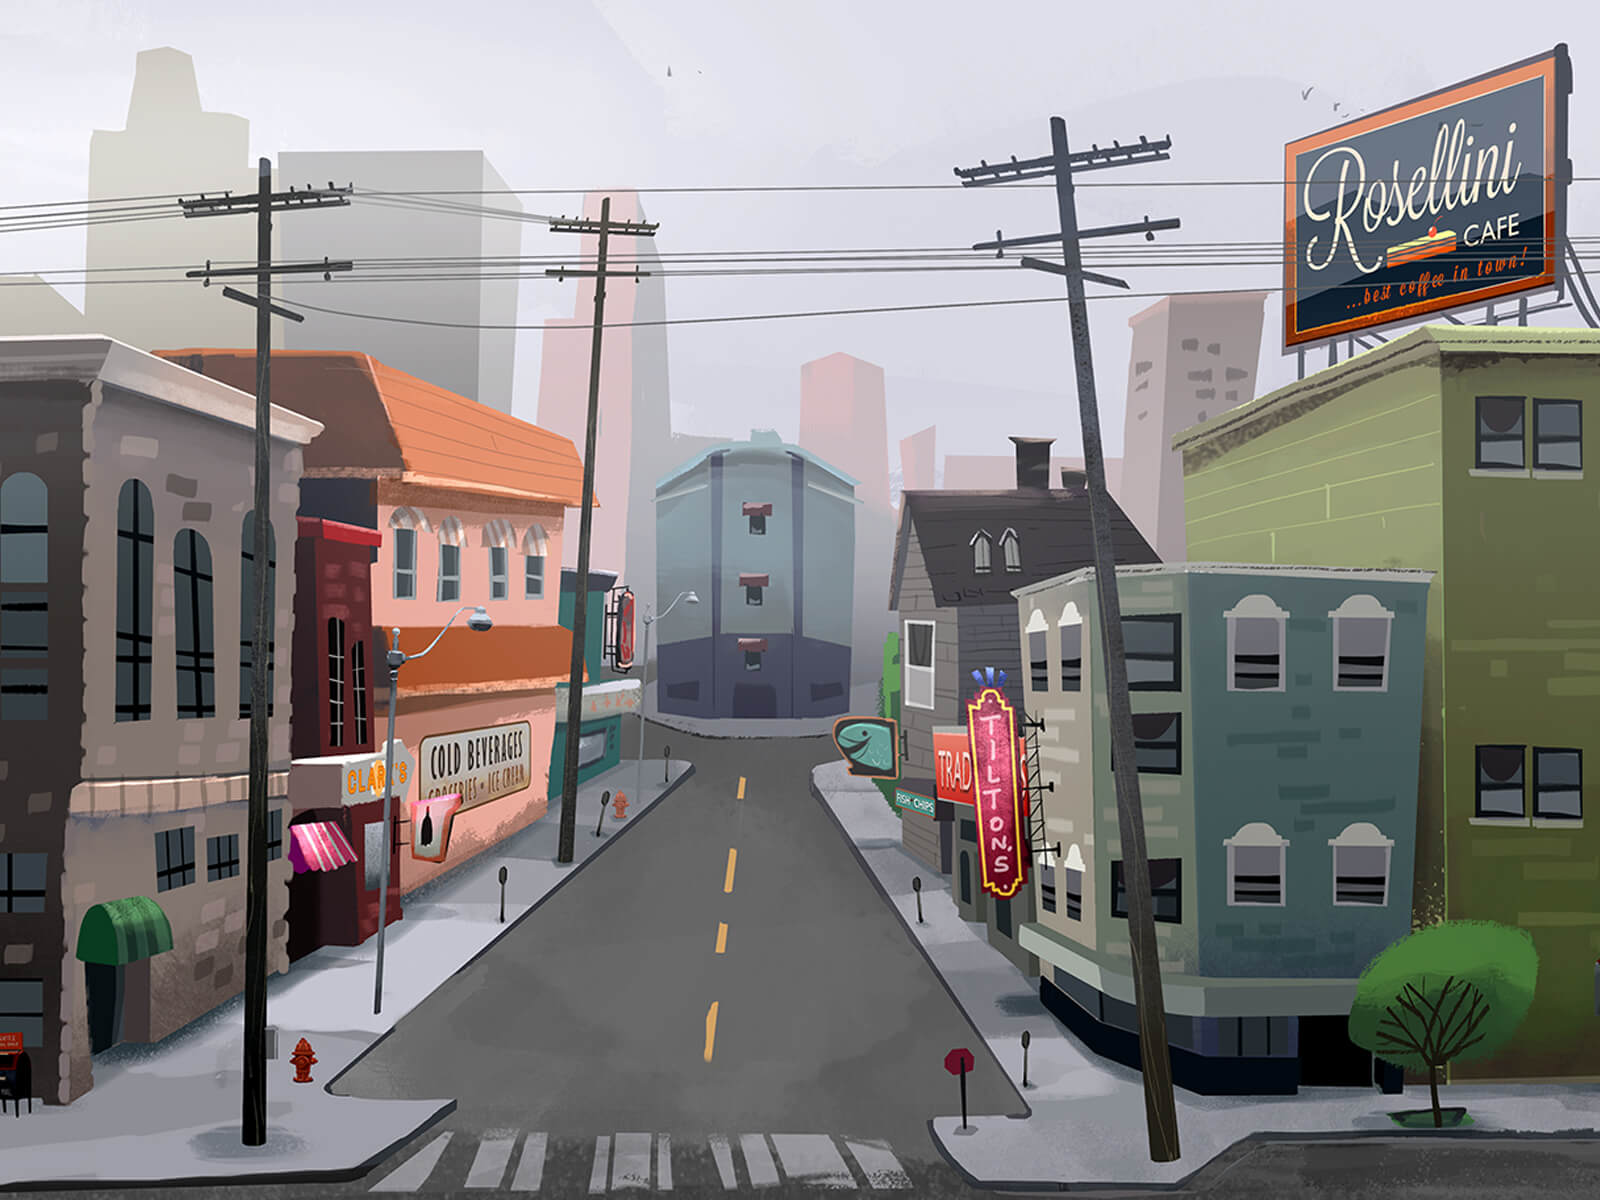 digital paintings of a city street from student animation "orientation center for the unseen" and other locations